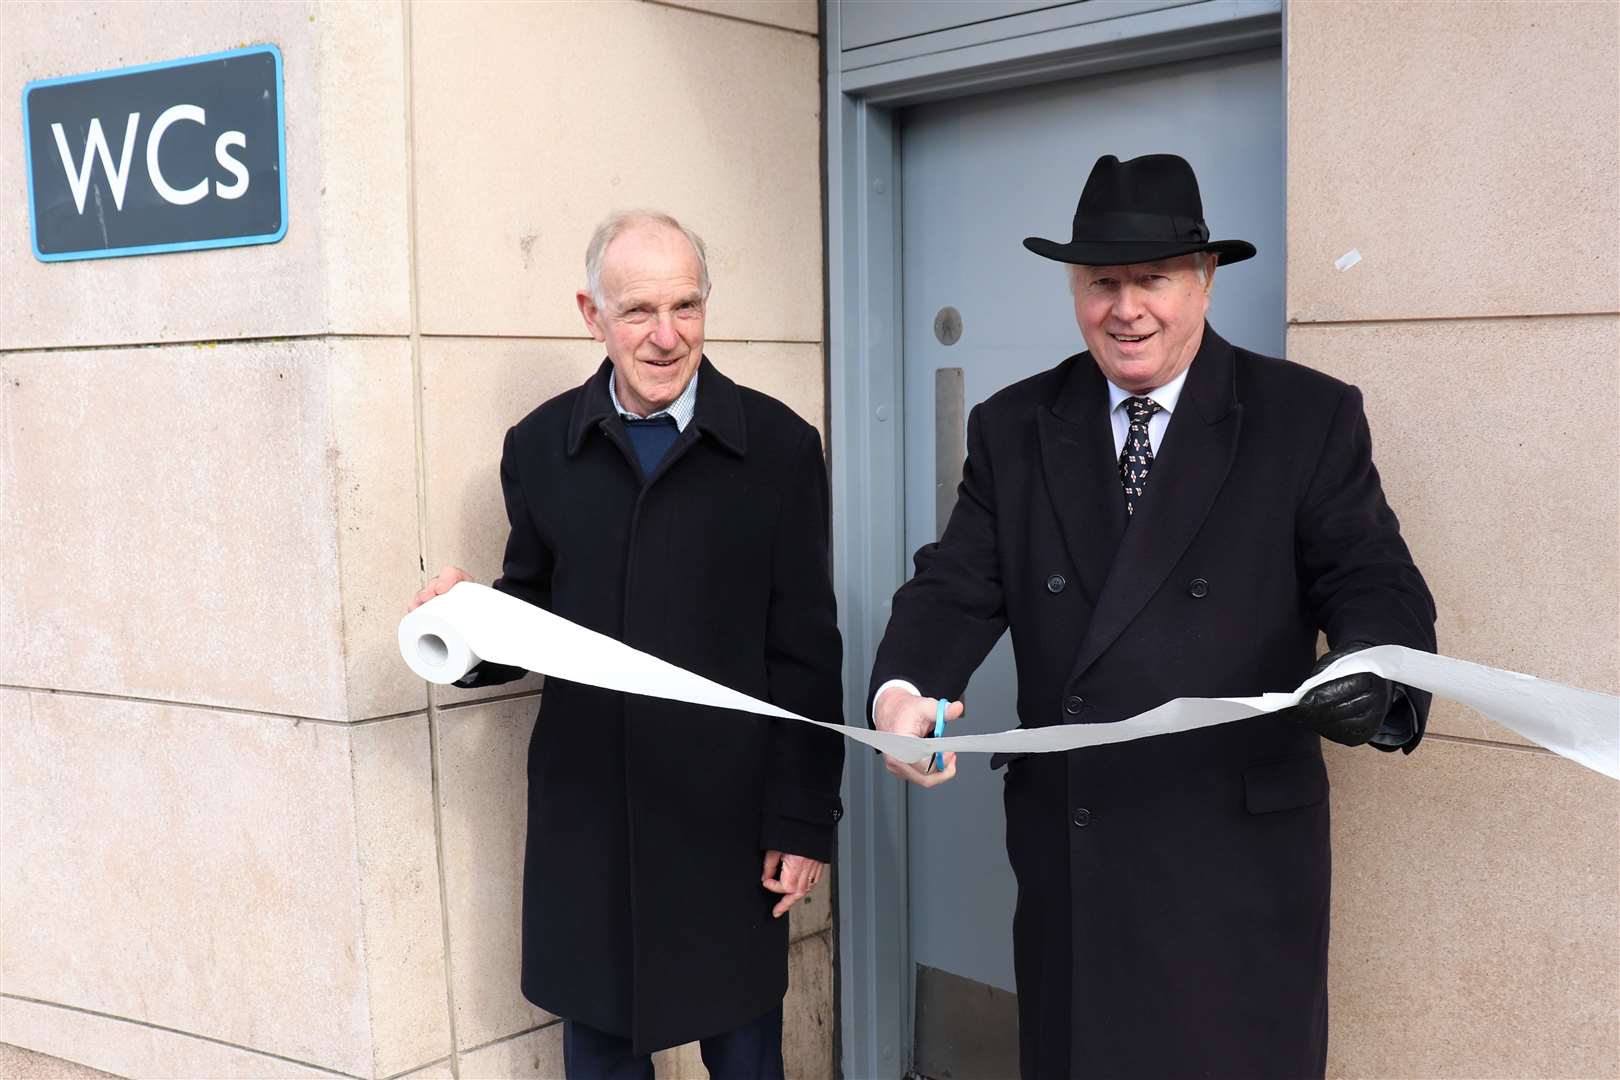 Councillors' John Collier (L) and David Monk (R) cut the 'ribbon' to open the town centre toilets